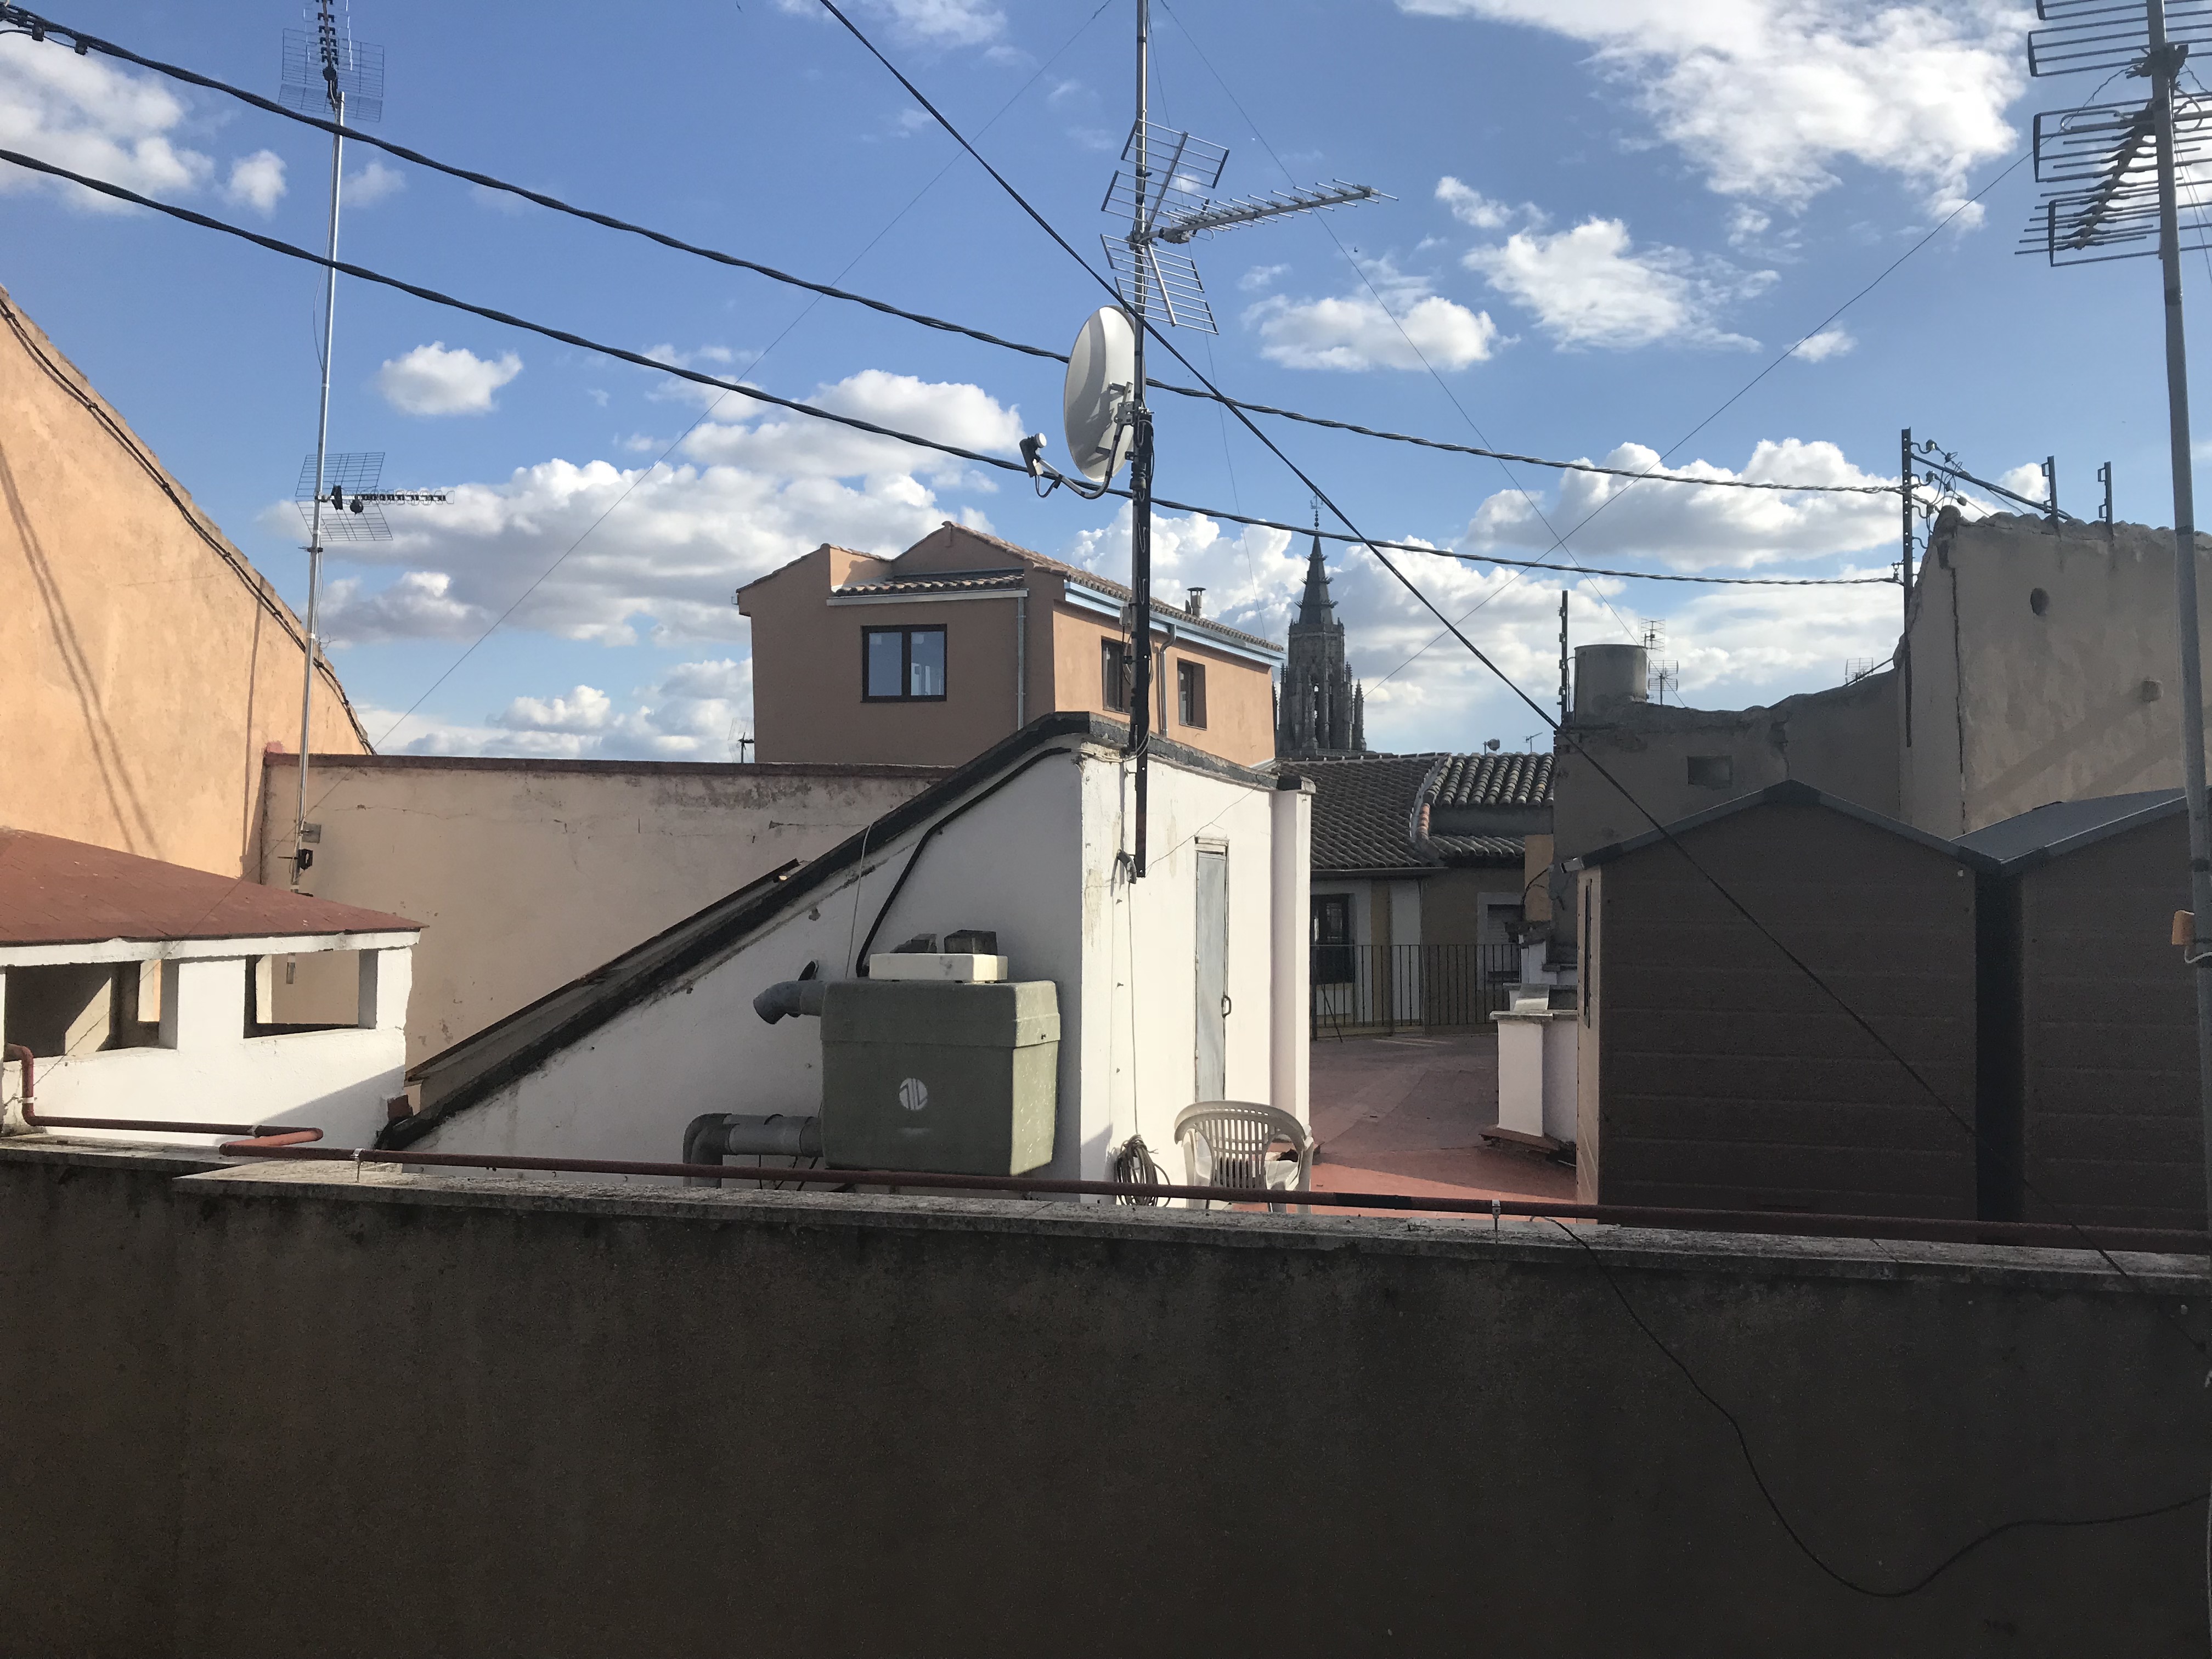 Rooftop of my apartment